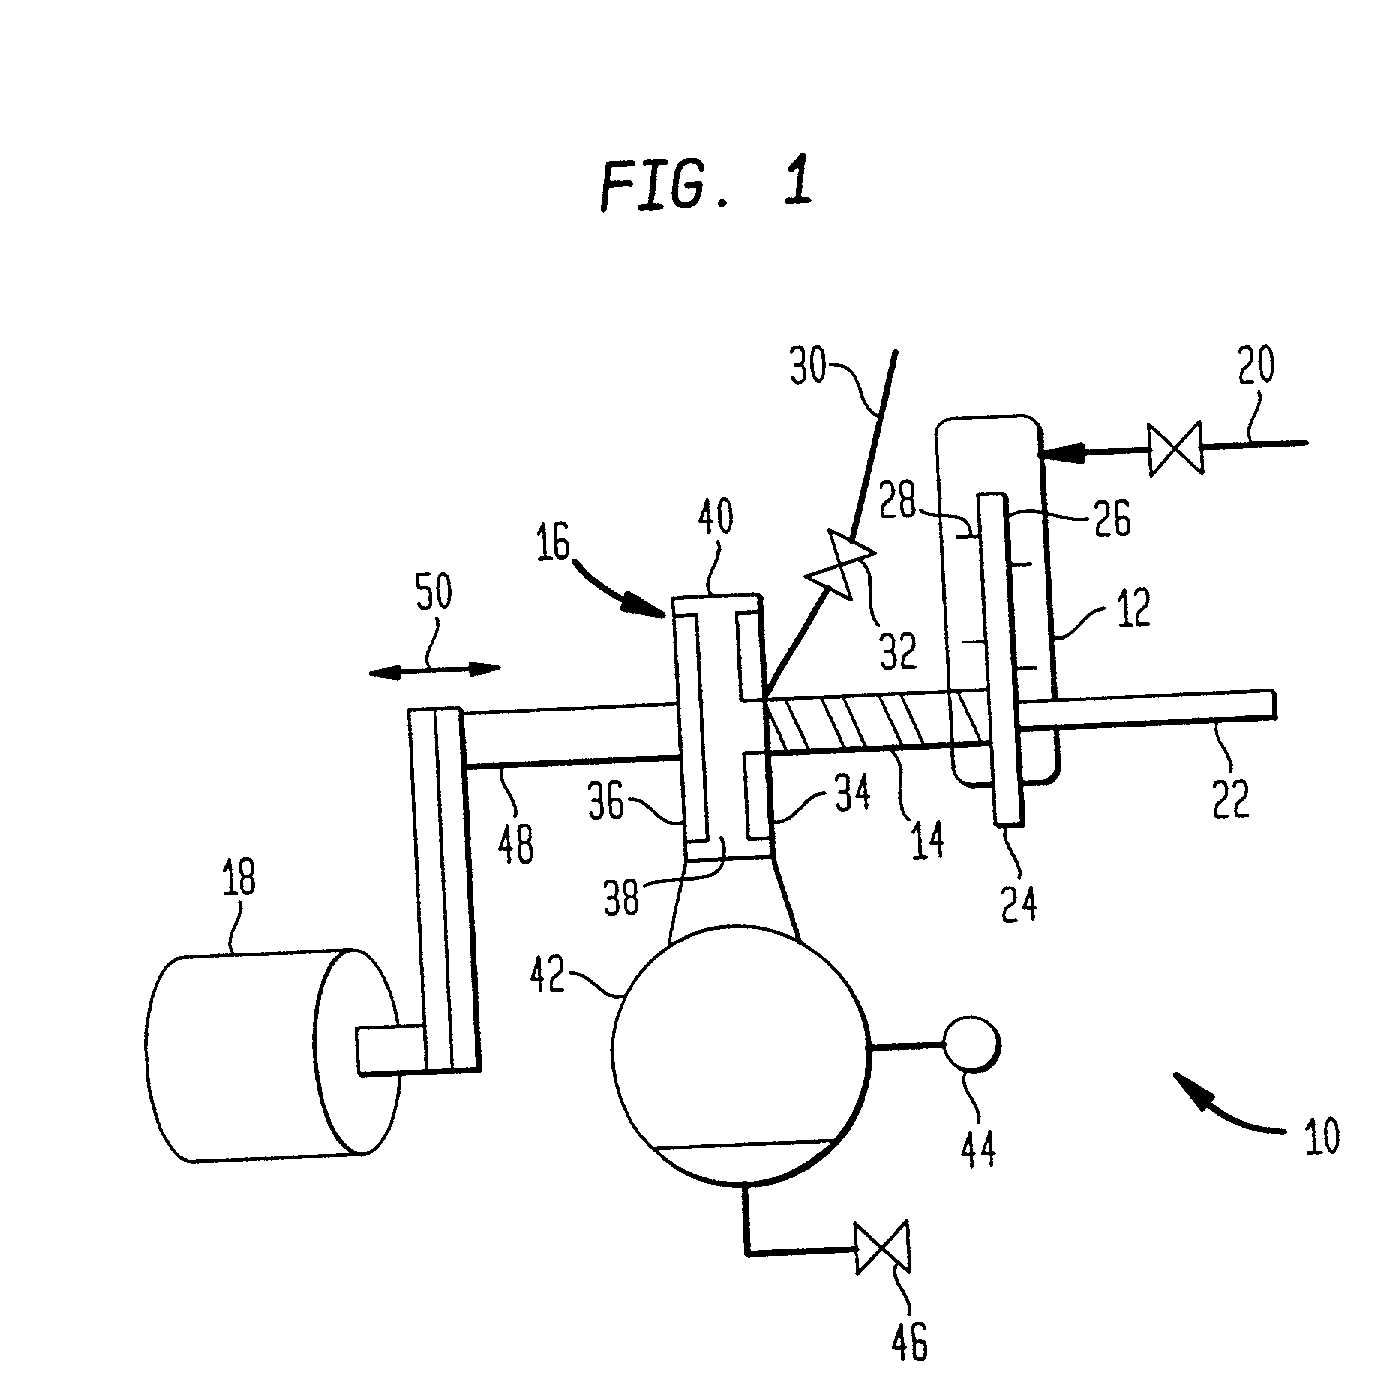 Method of bleaching and providing papermaking fibers with durable curl